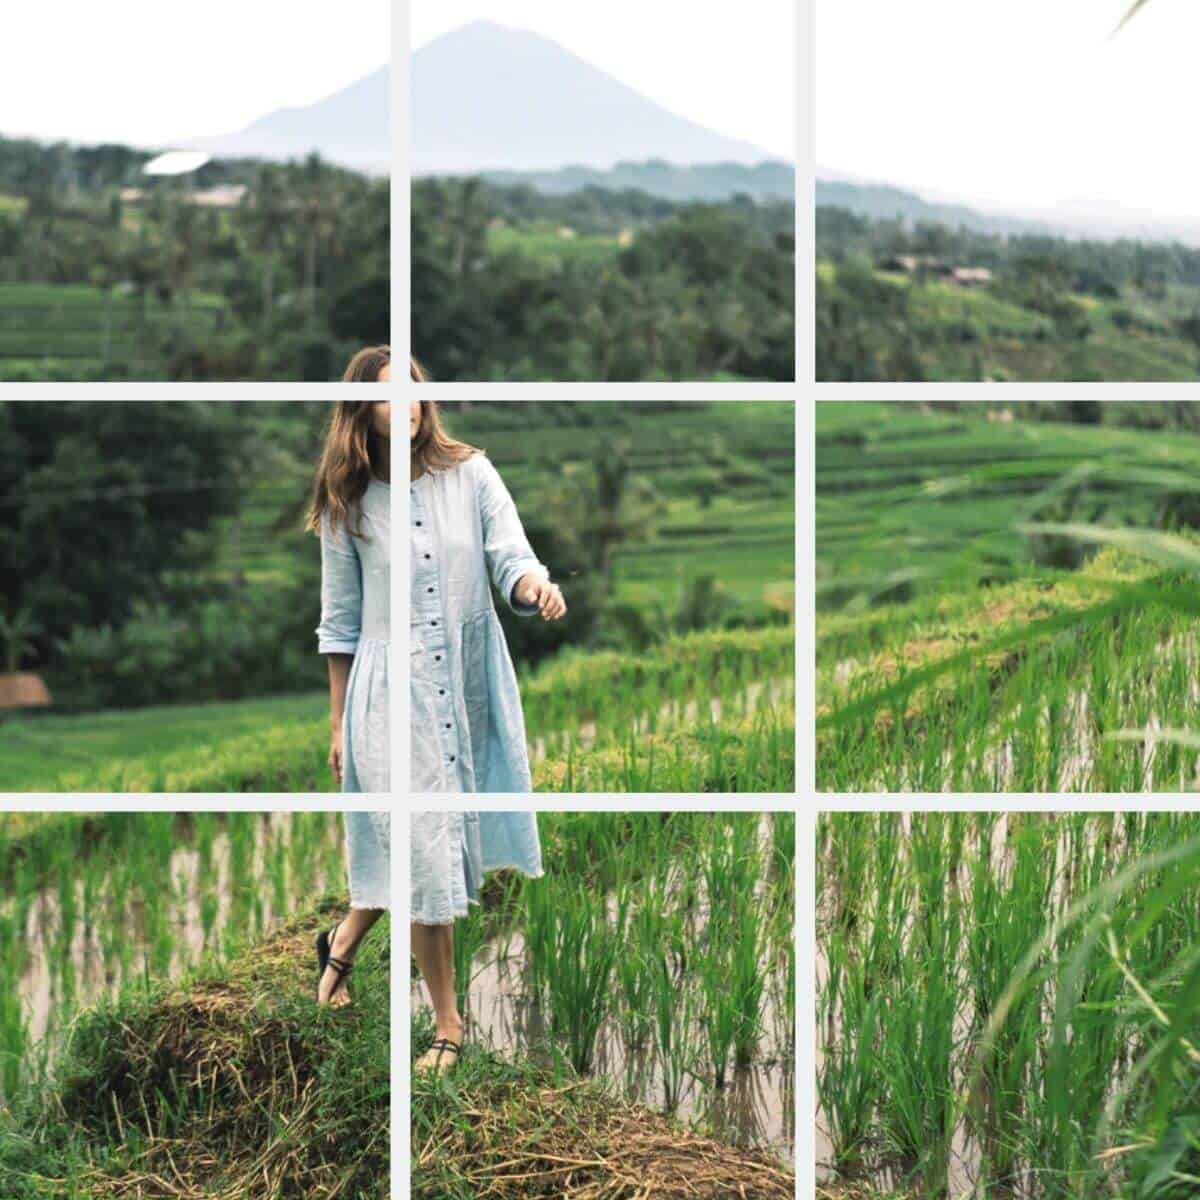 Person walking in a field with a grid overlay.